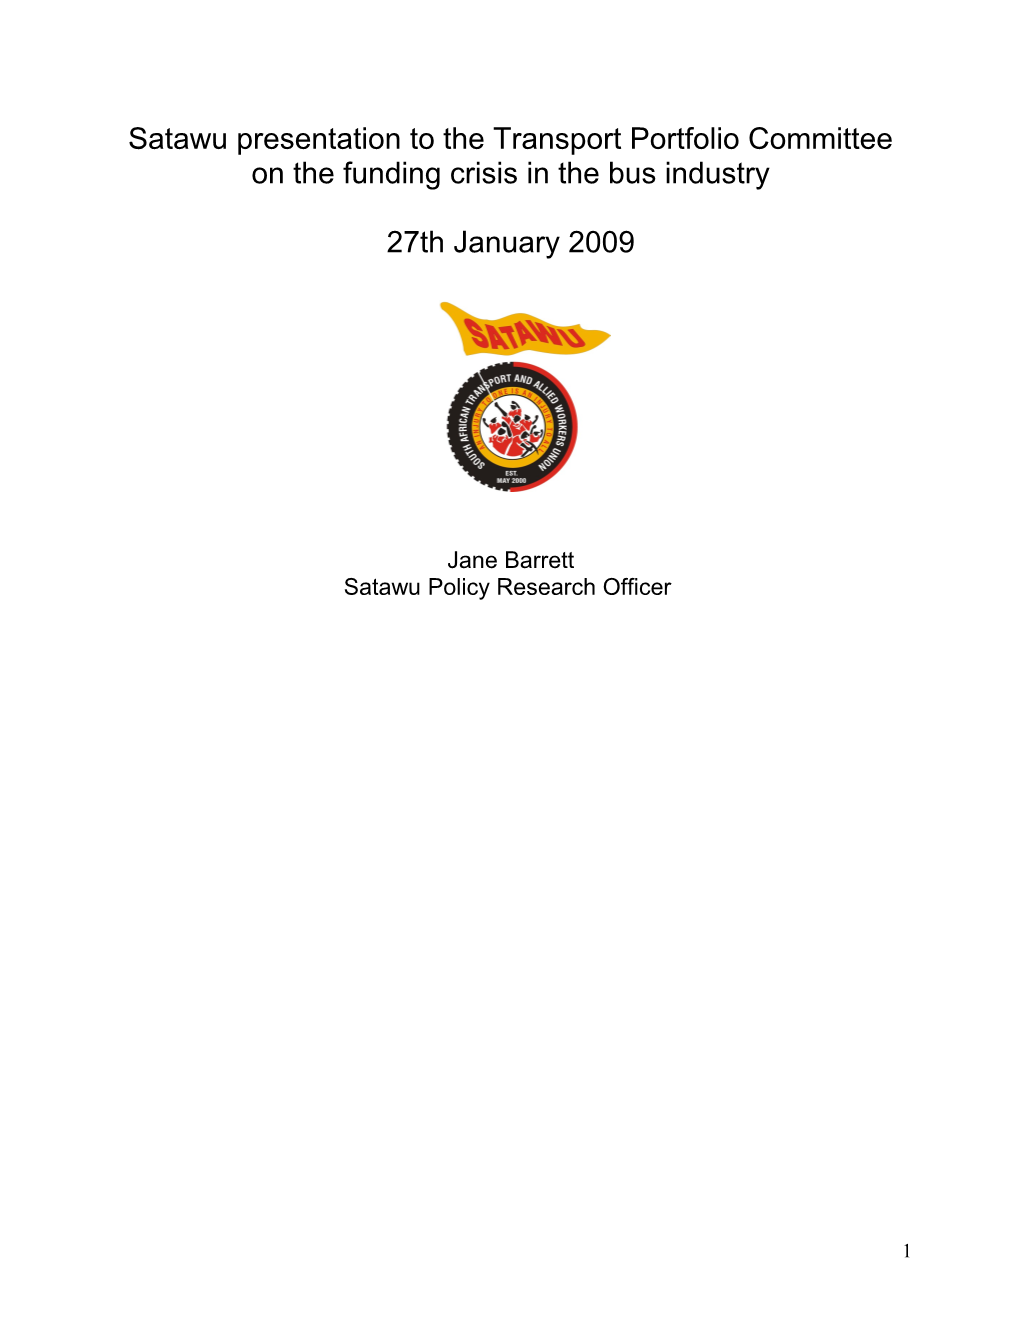 Satawu Briefing Document on the Funding Crisis in the Bus Industry 23